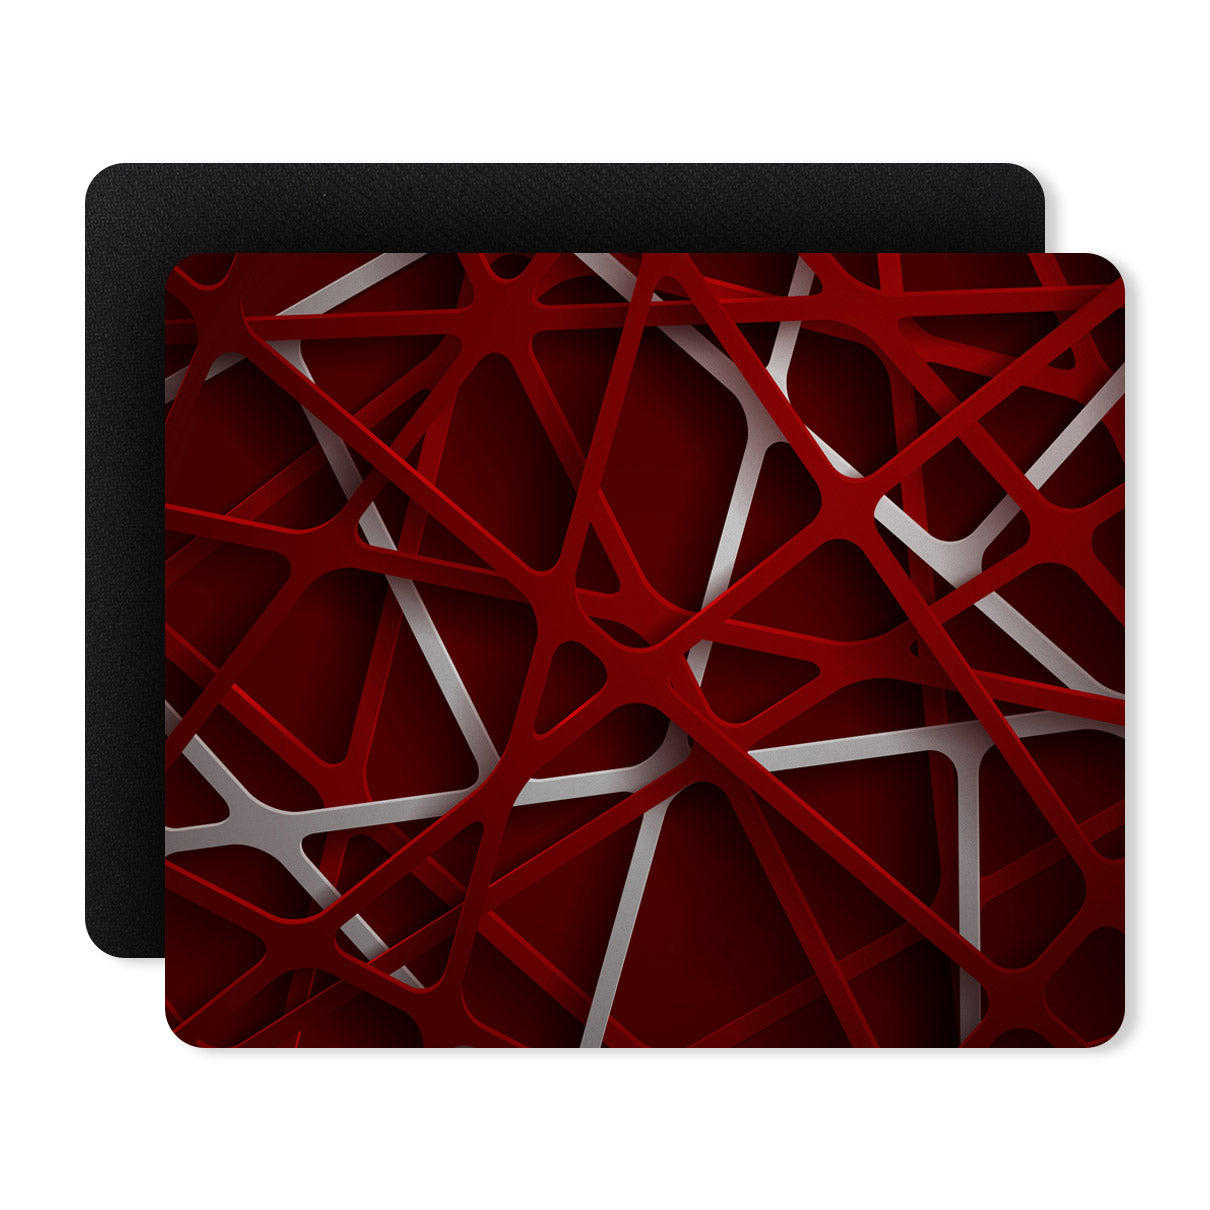 3d Abstract Design Red Designer Printed Premium Mouse pad (9 in x 7.5 in)